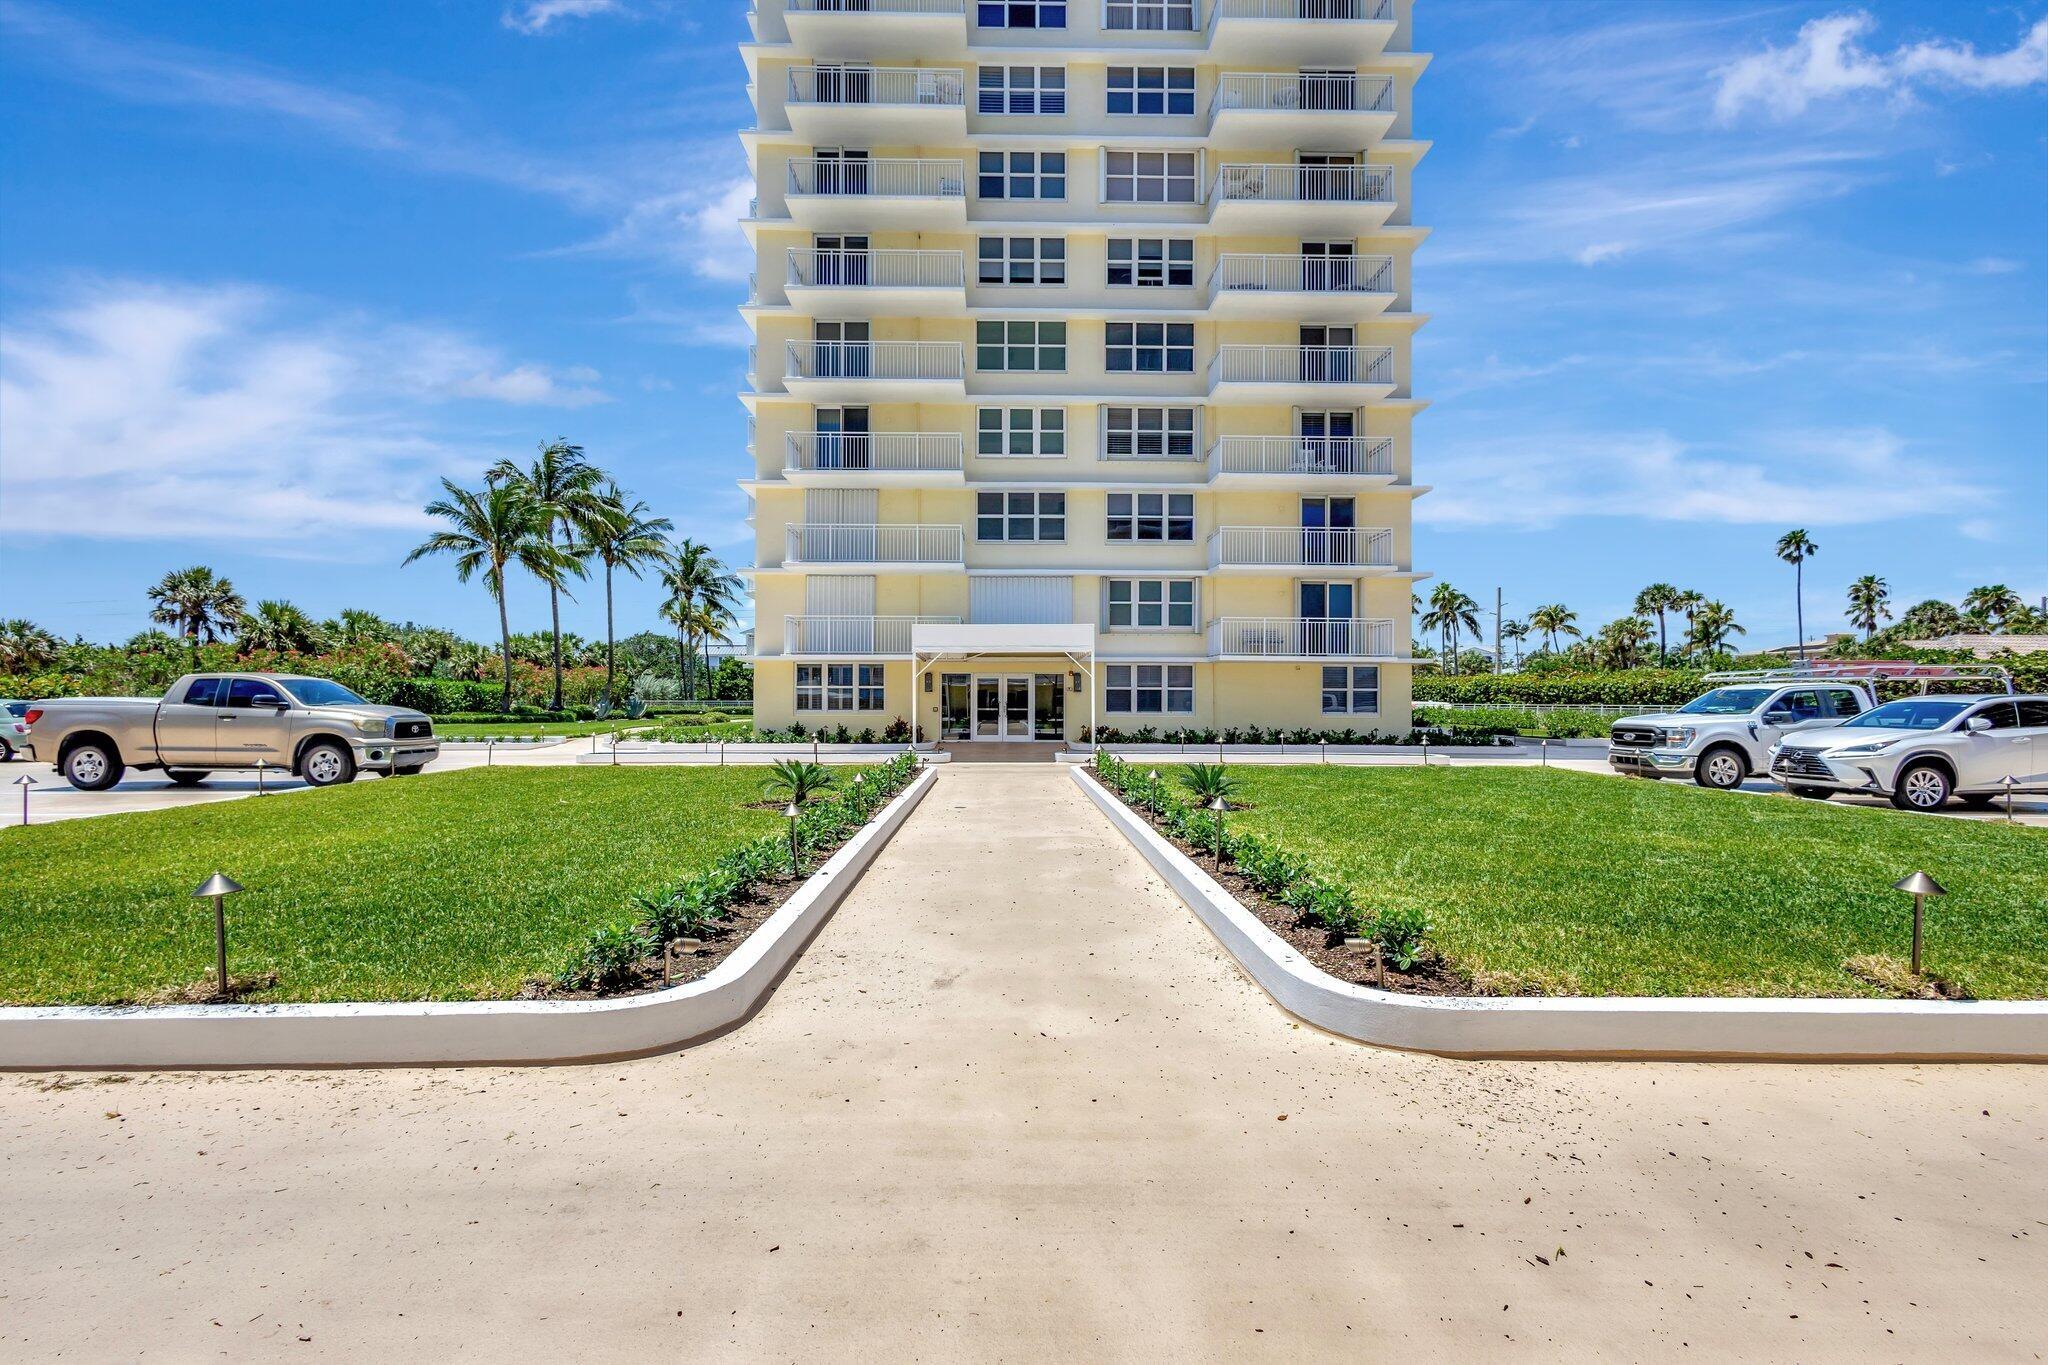 Property Image for 500 Ocean Drive W-1a